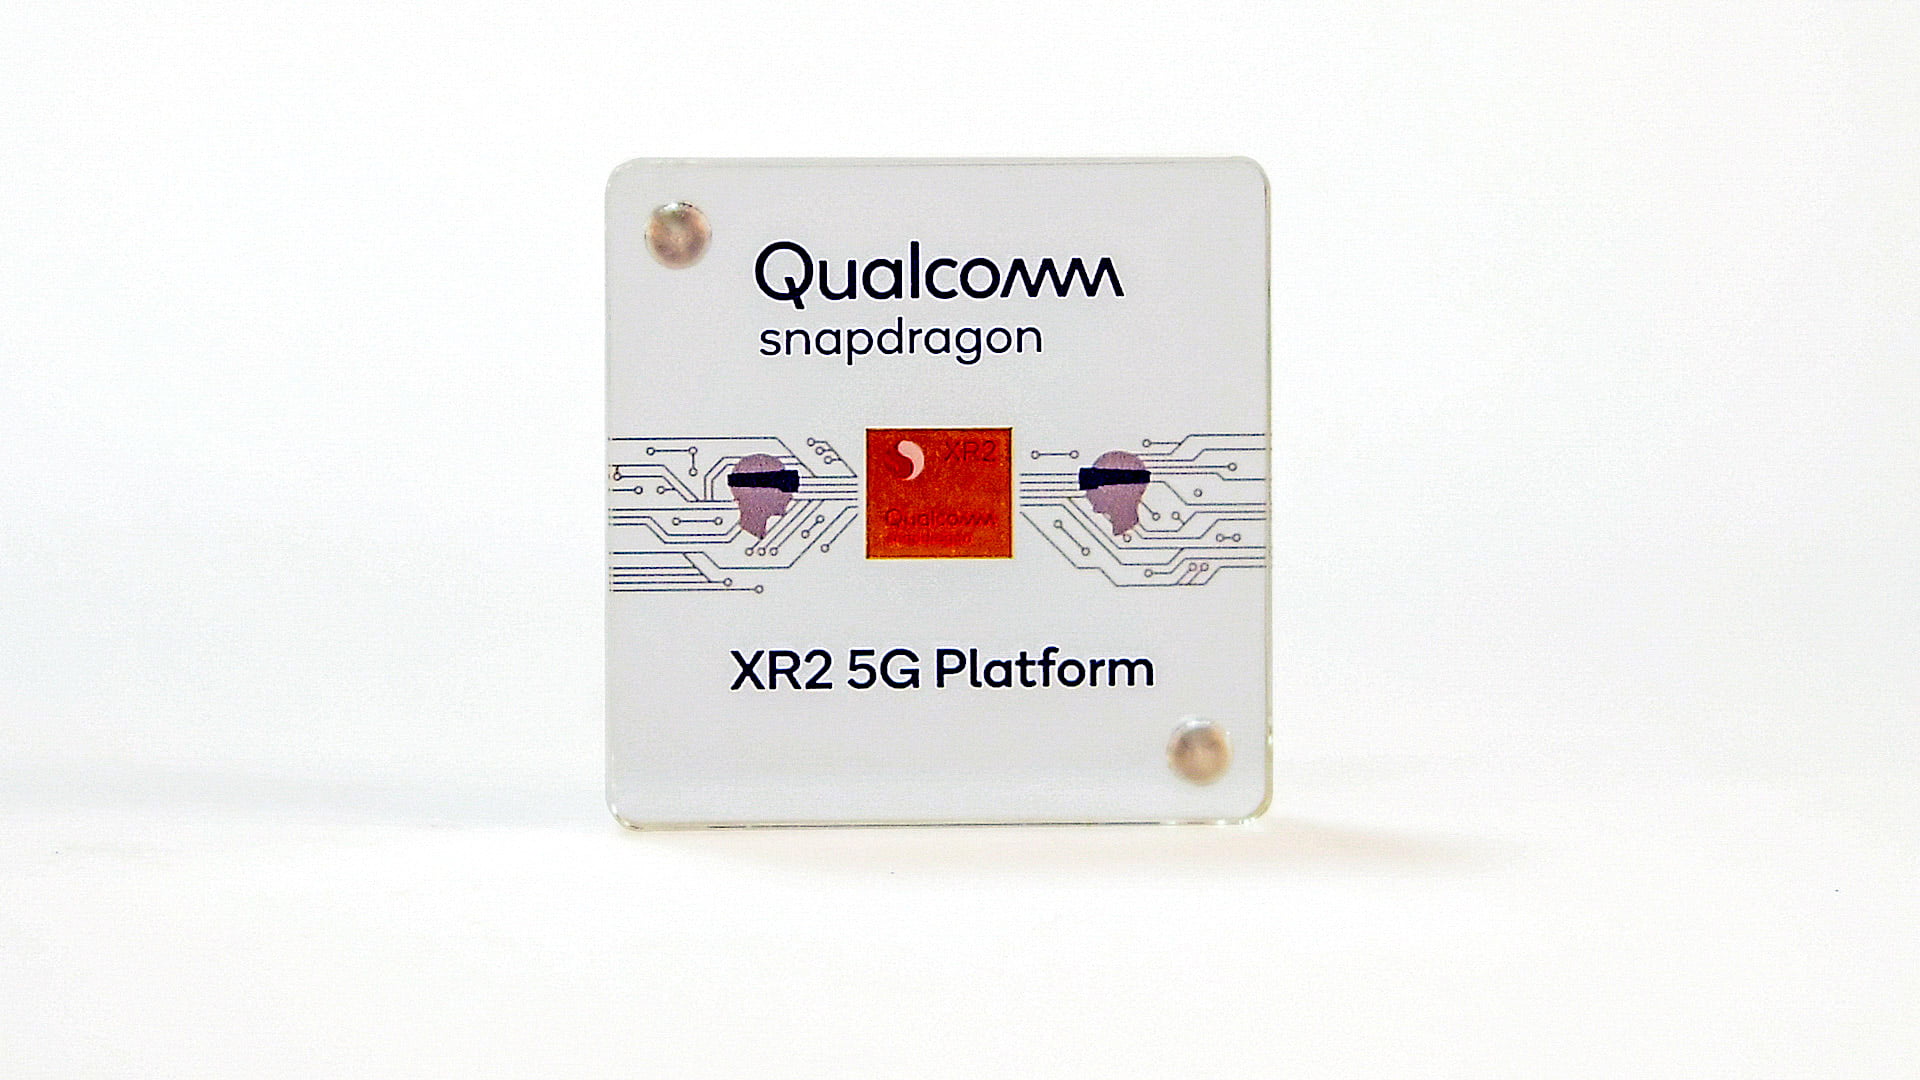 Qualcomm XR2: First hint at "Project Halliday"